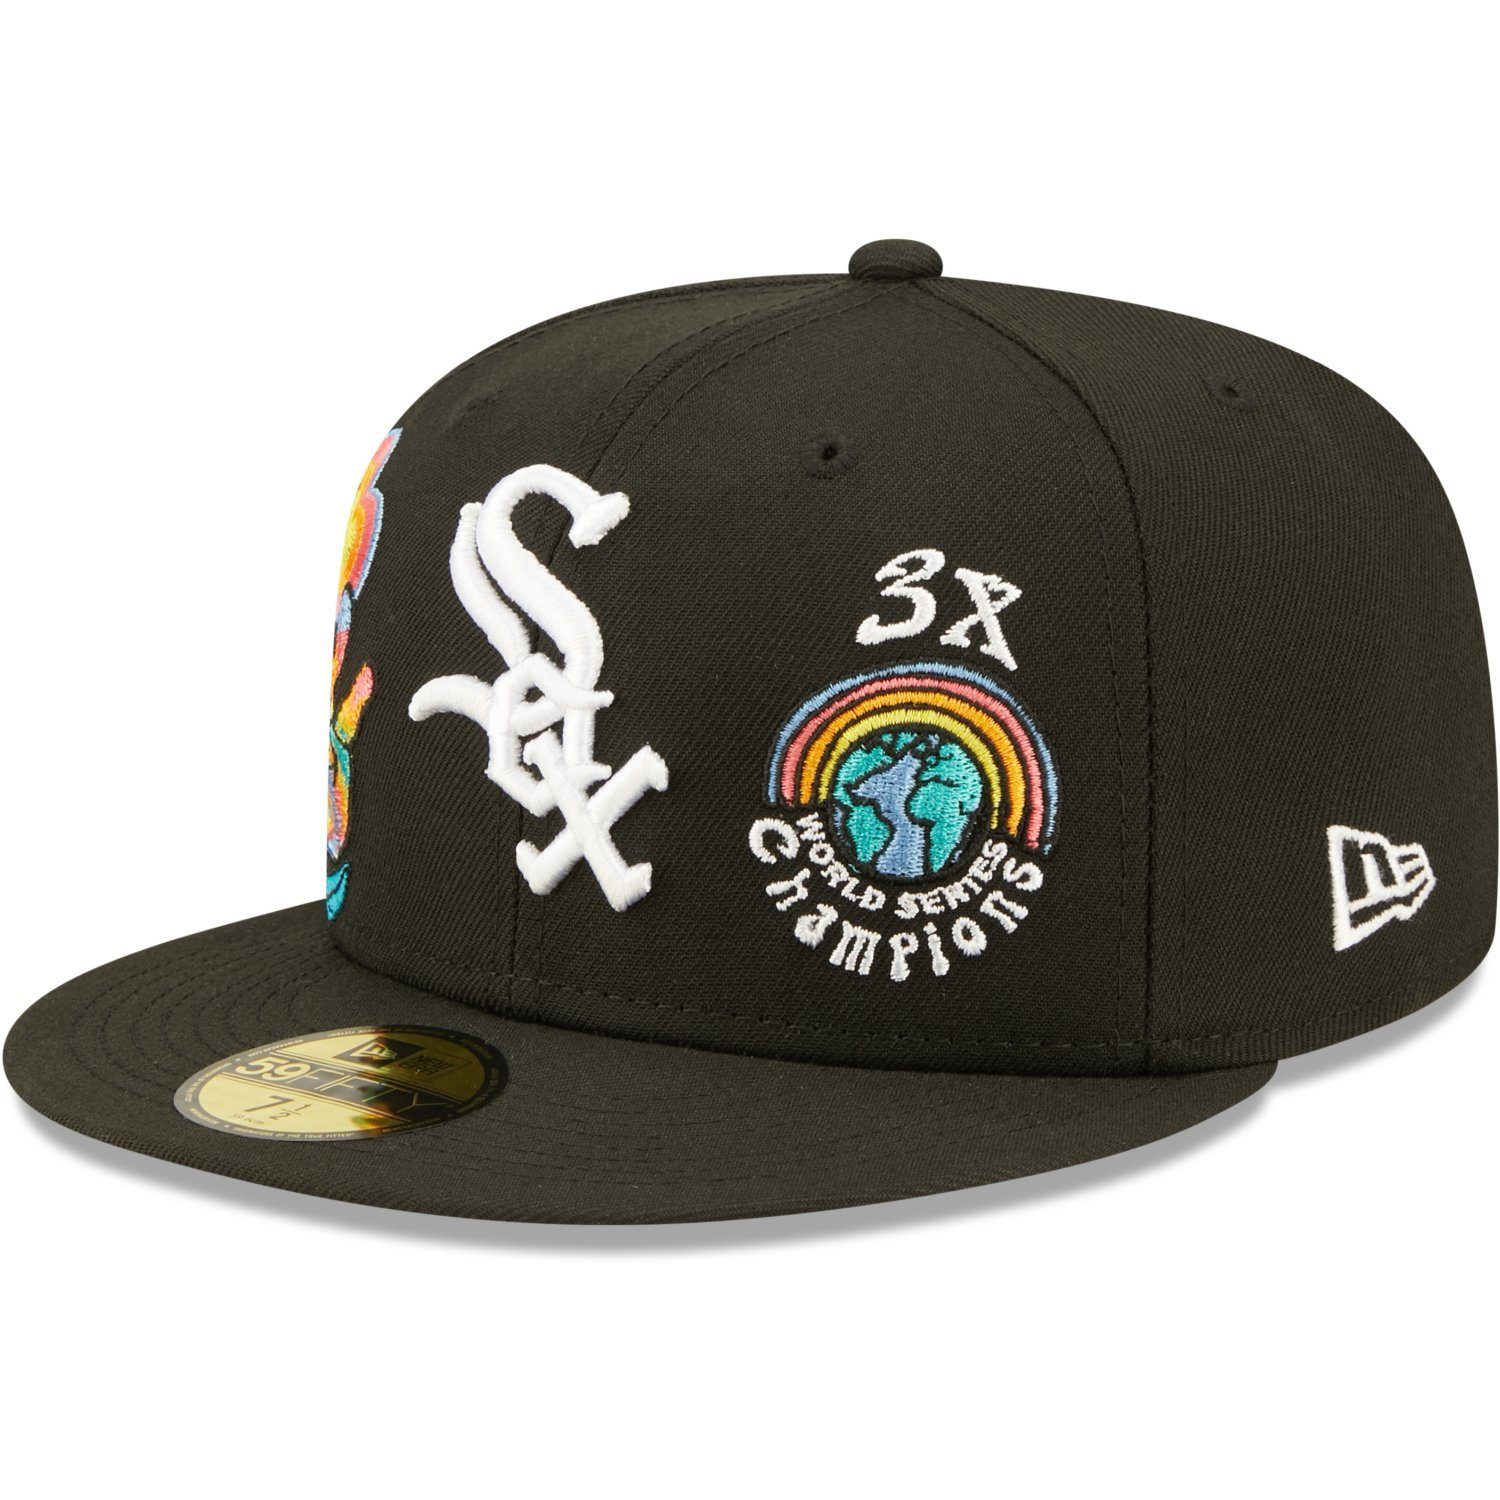 New Era Fitted Chicago Sox 59Fifty Cap GROOVY White